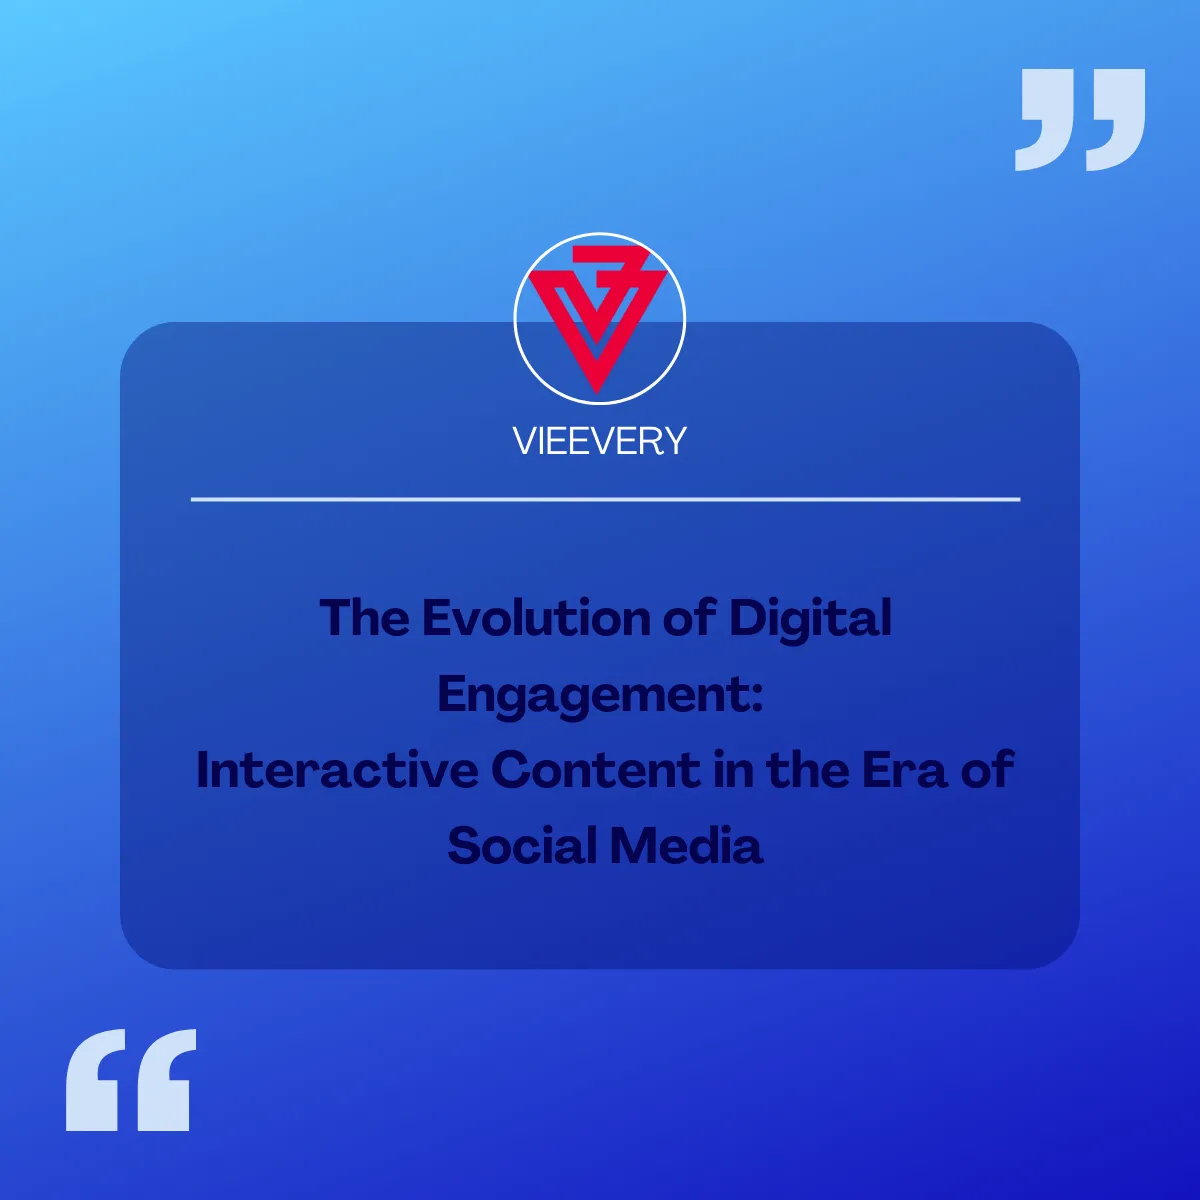 The Evolution of Digital Engagement: Interactive Content in the Era of Social Media